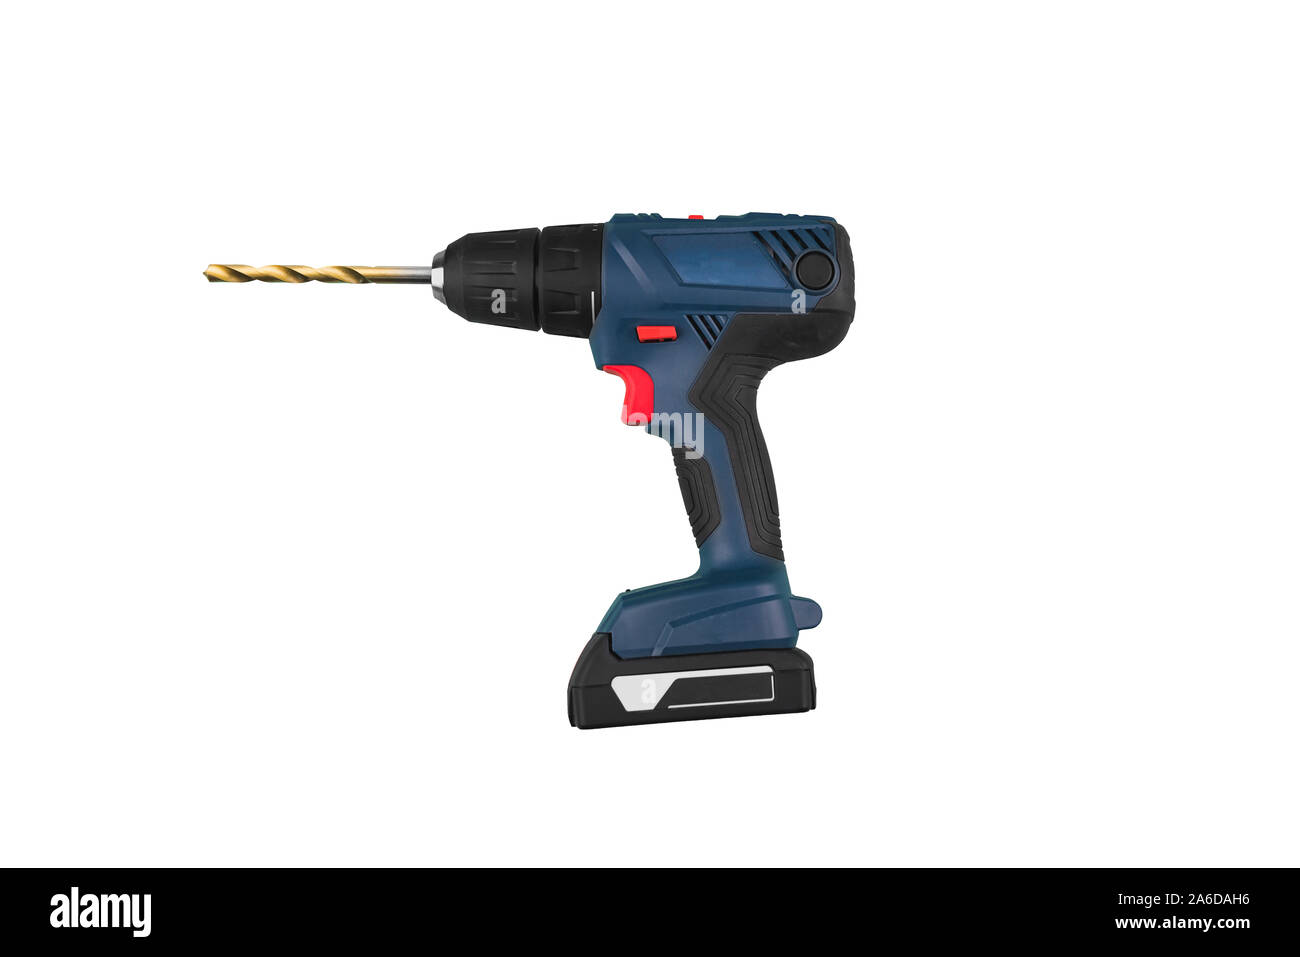 Blue screwdriver power tool with yellow drill bit on white background isolated. Suitable for any purprose use. Stock Photo